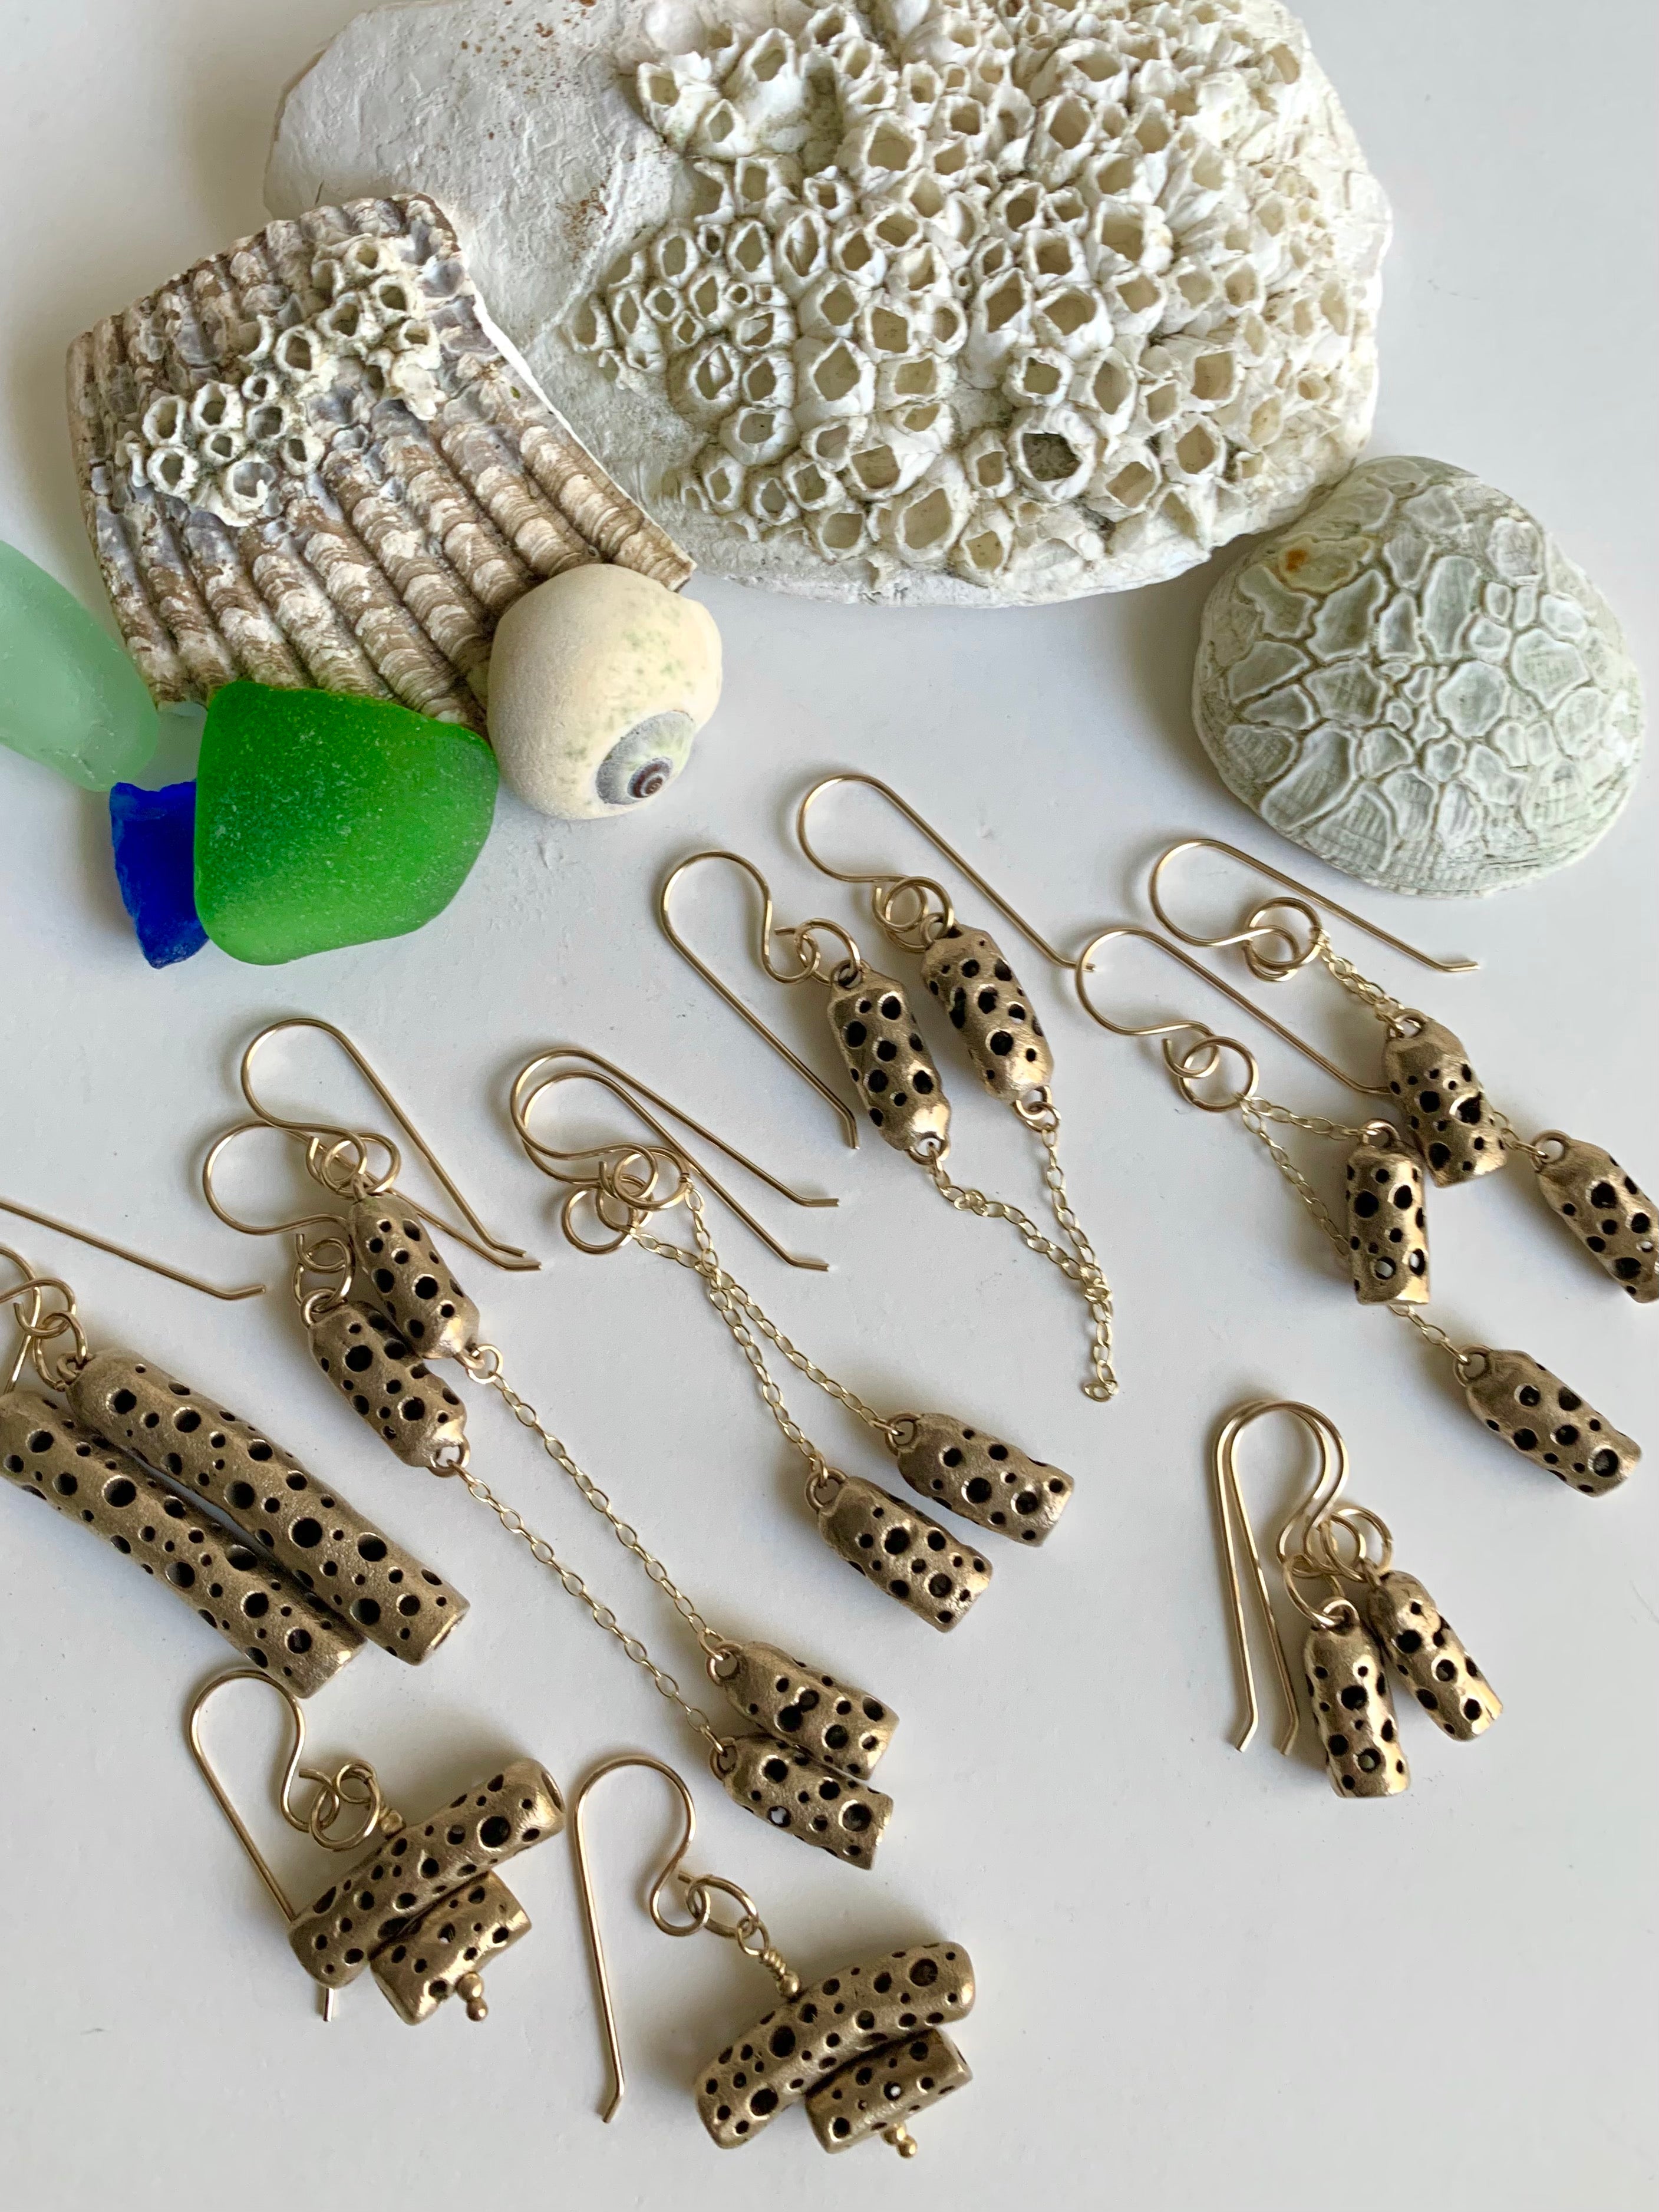 Bronze artisan made earrings with shells